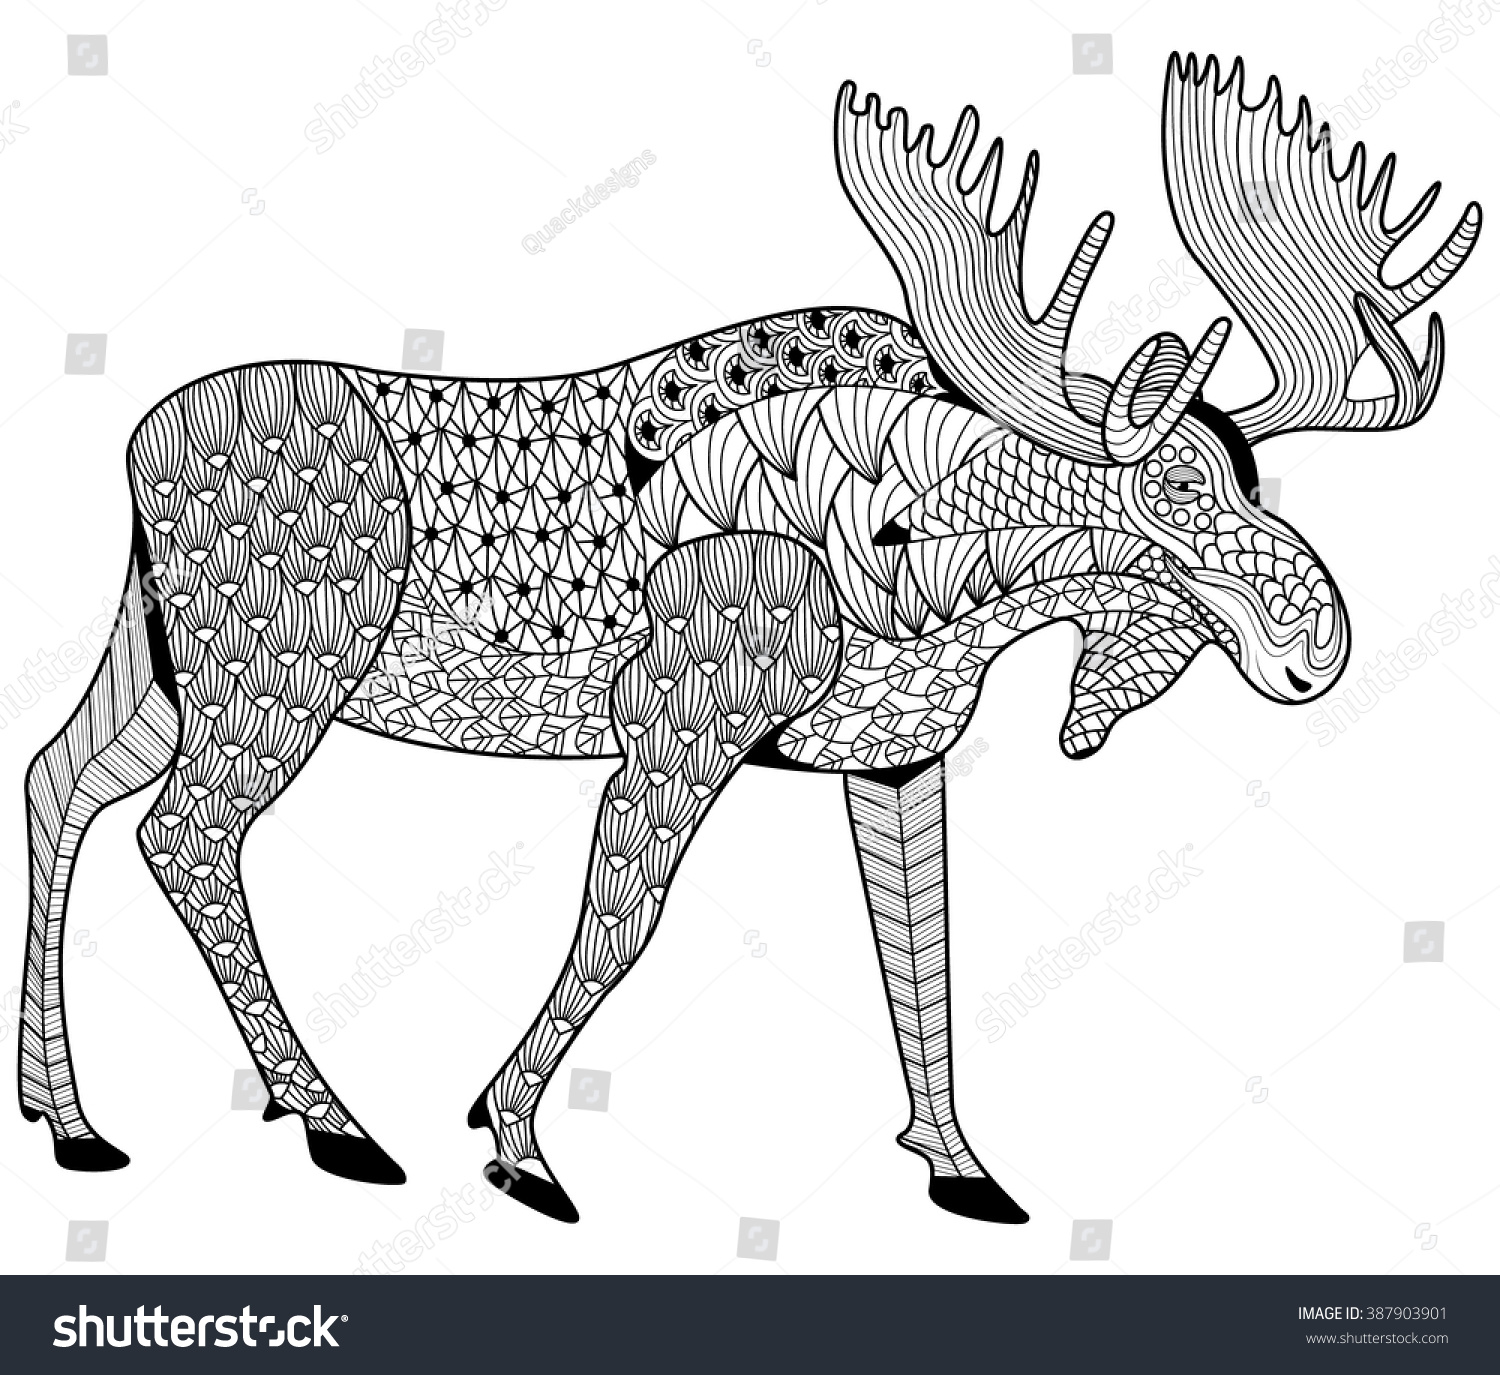 Moose coloring page for adults zen tangle design for coloring printing